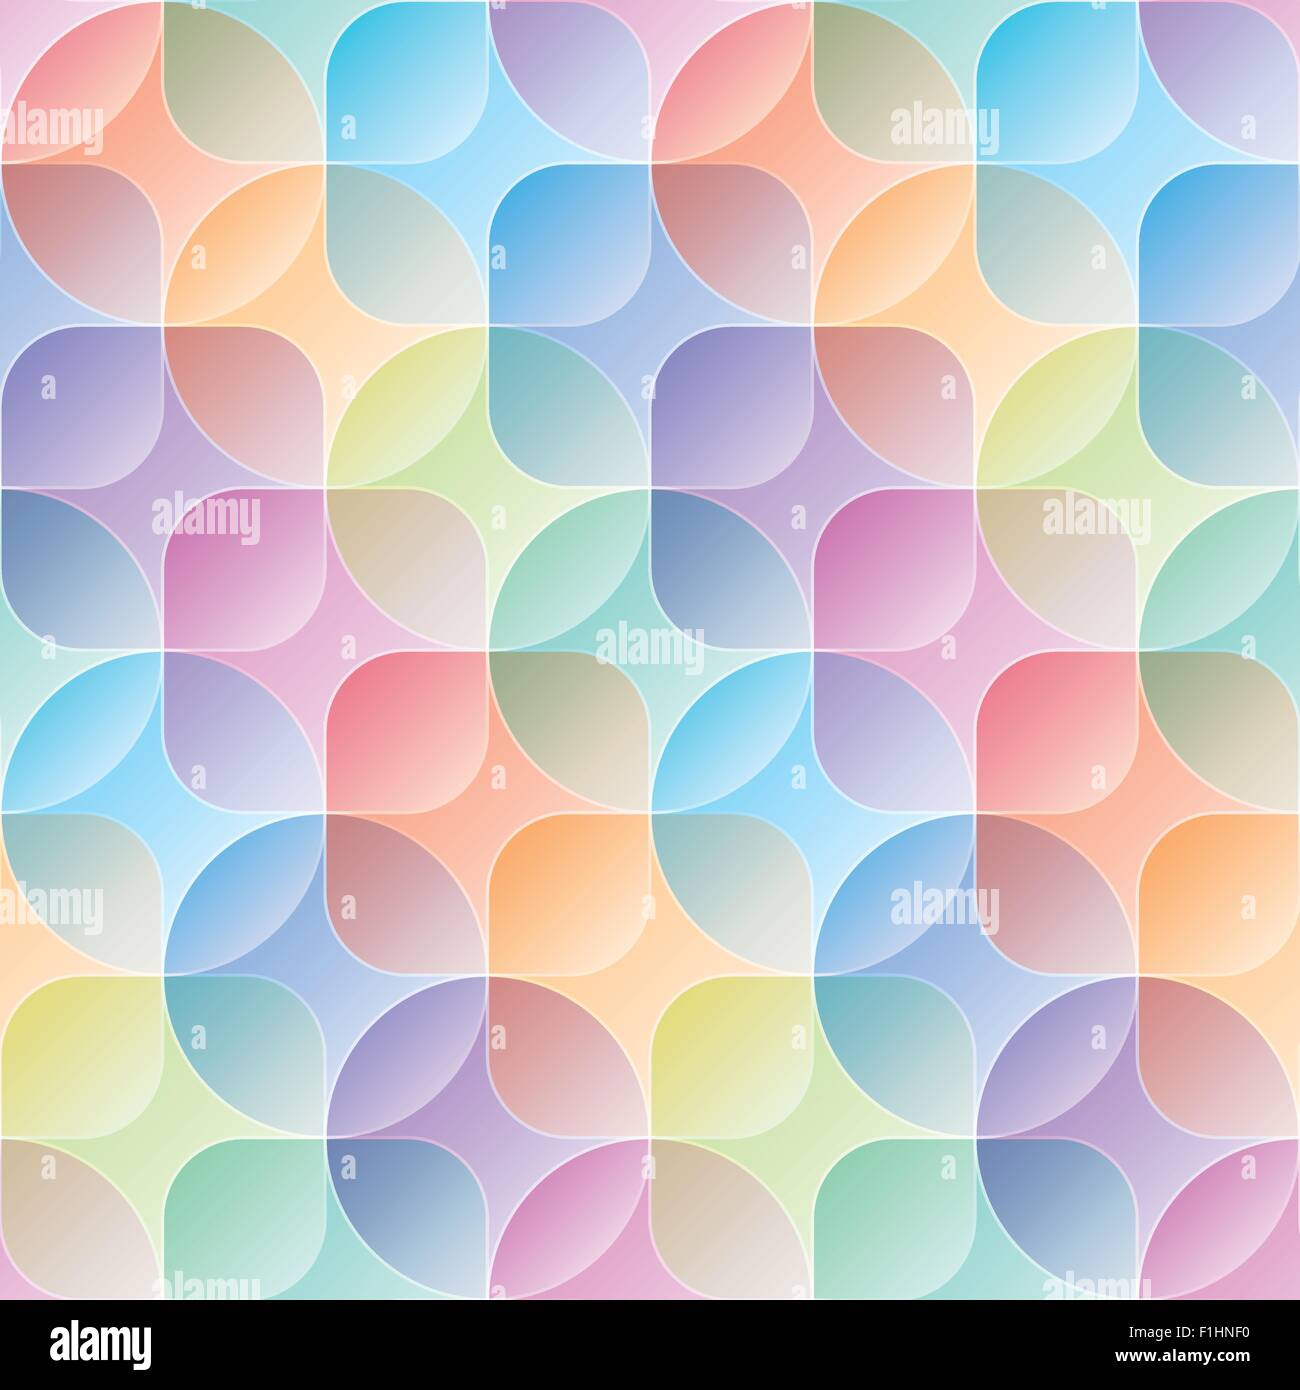 Overlap and transparent circles and squares. Colorful seamless background. Vector EPS10 tileable pattern. Stock Vector